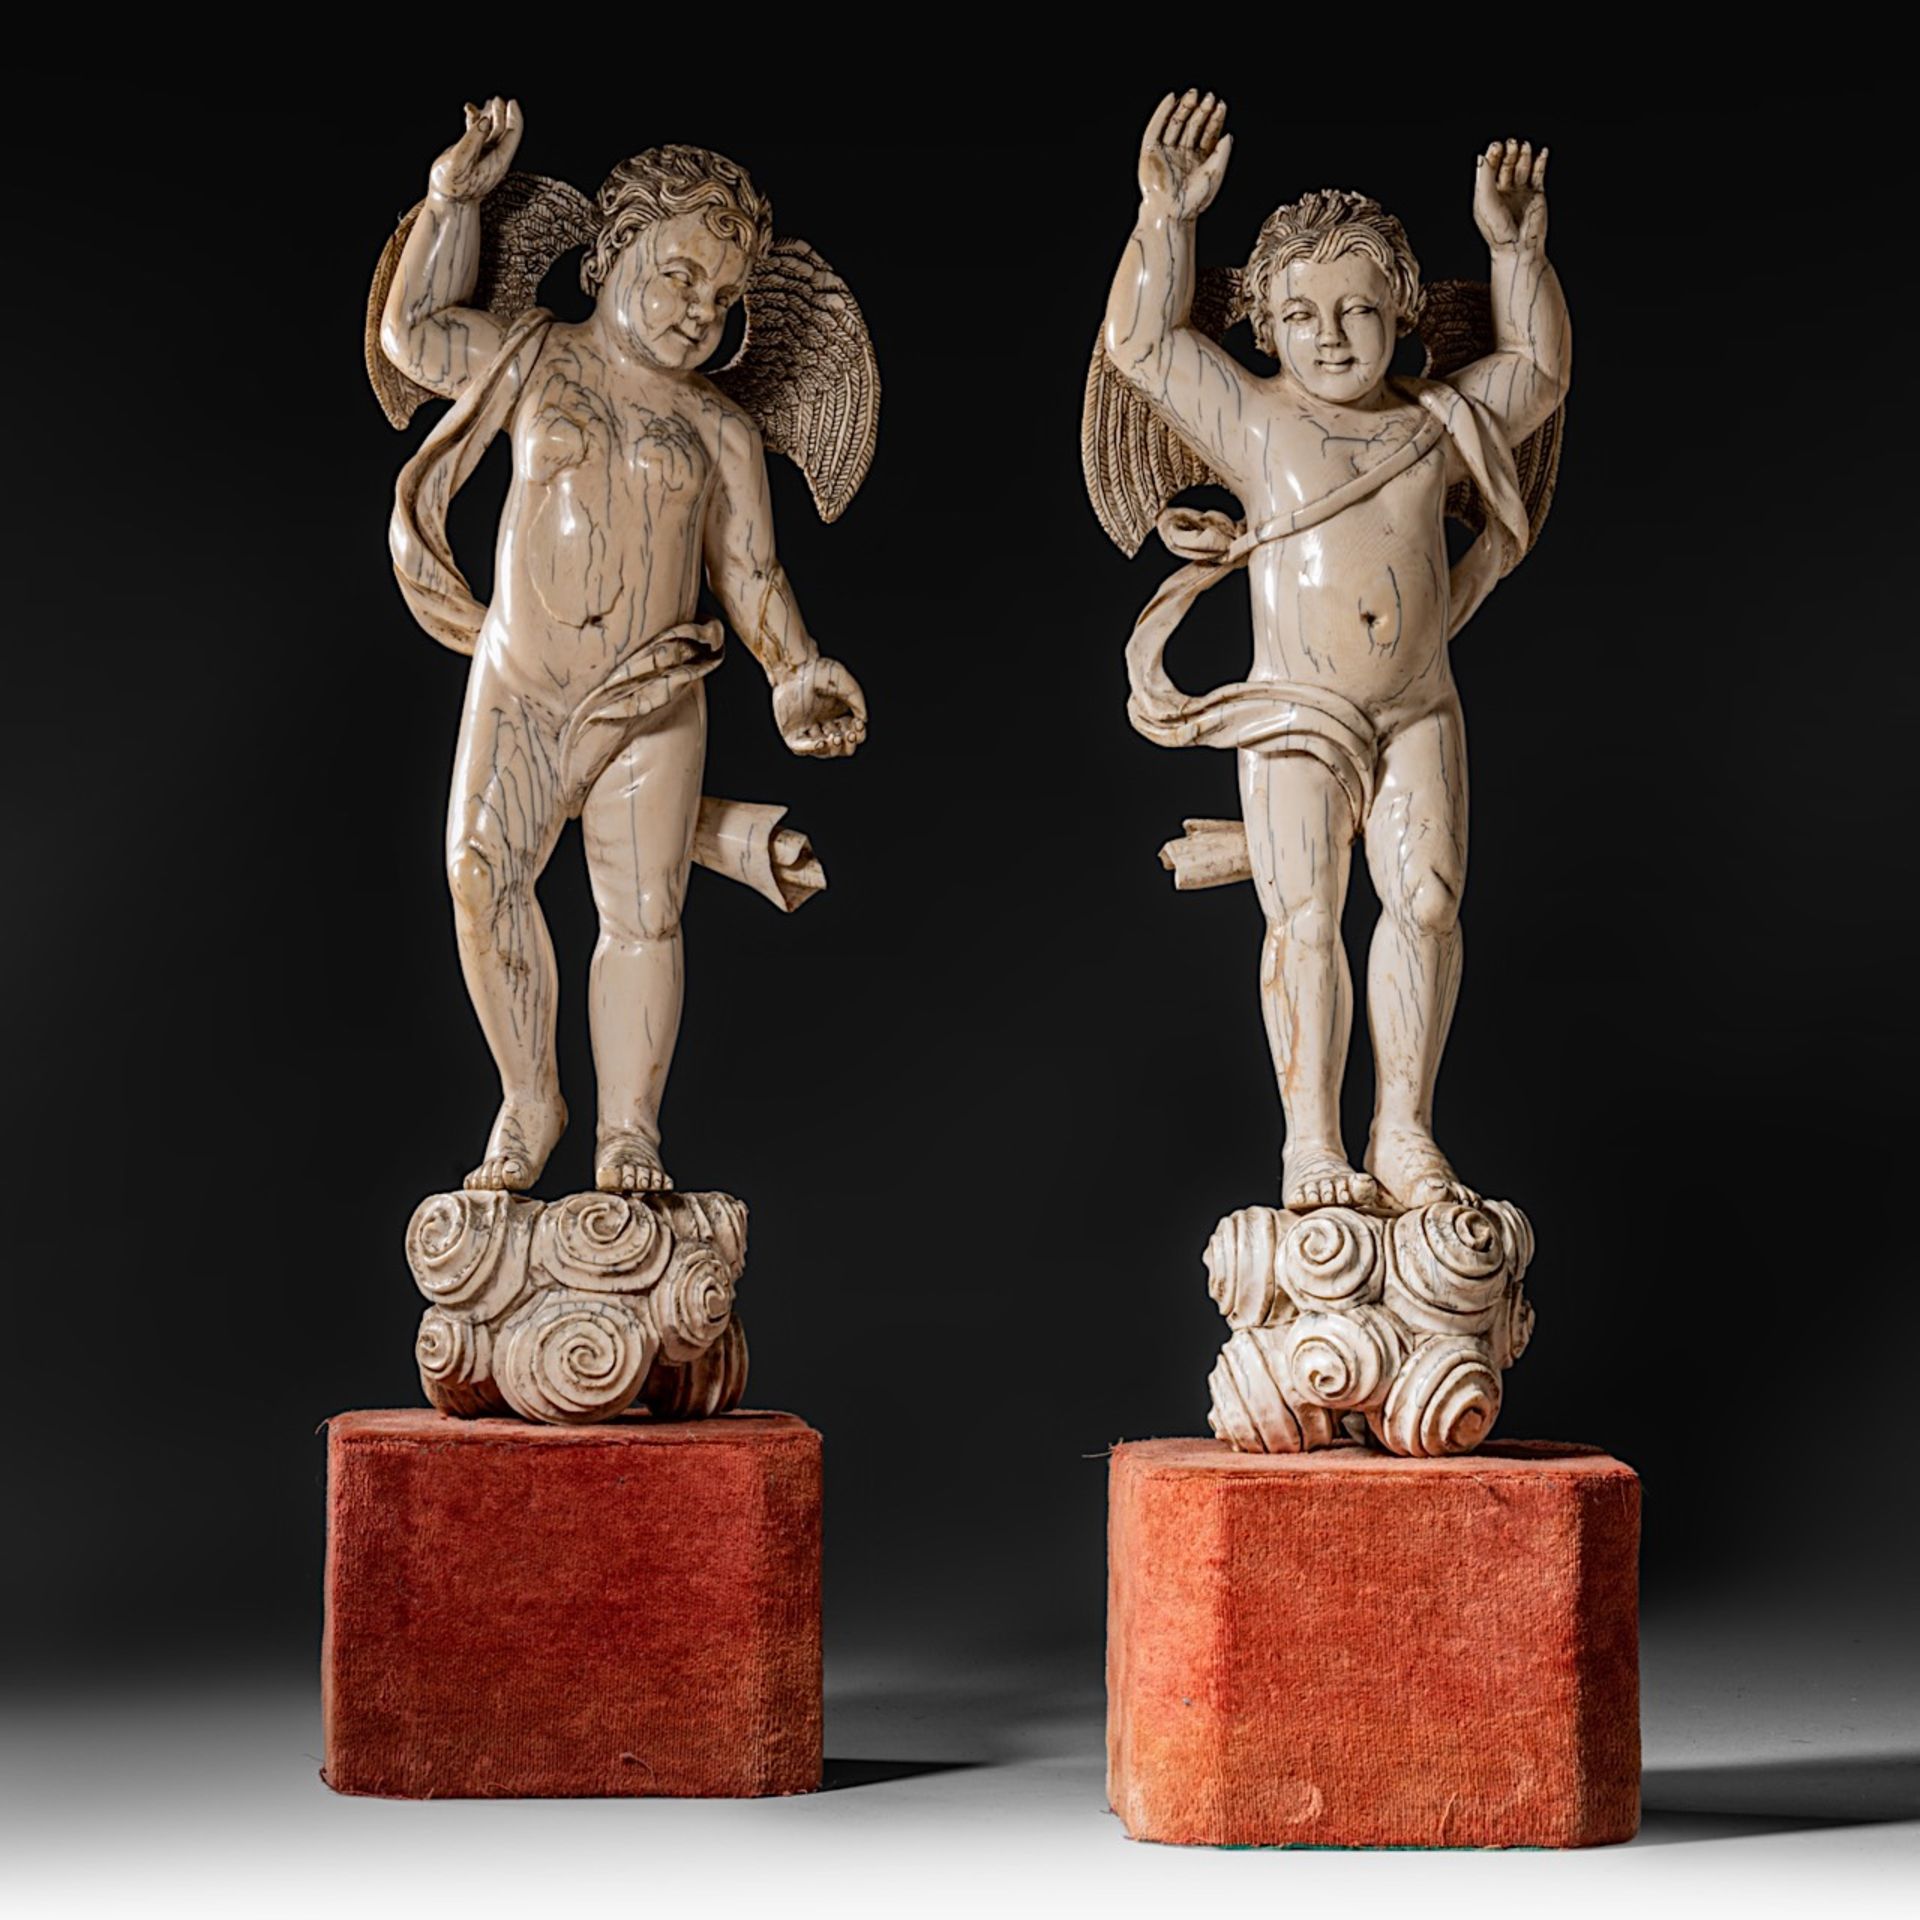 A pair of 17thC Indo-Portuguese ivory angels, H (figures) 38,5 cm - total H 49 cm / 2862 - 2968 g (+ - Image 2 of 7